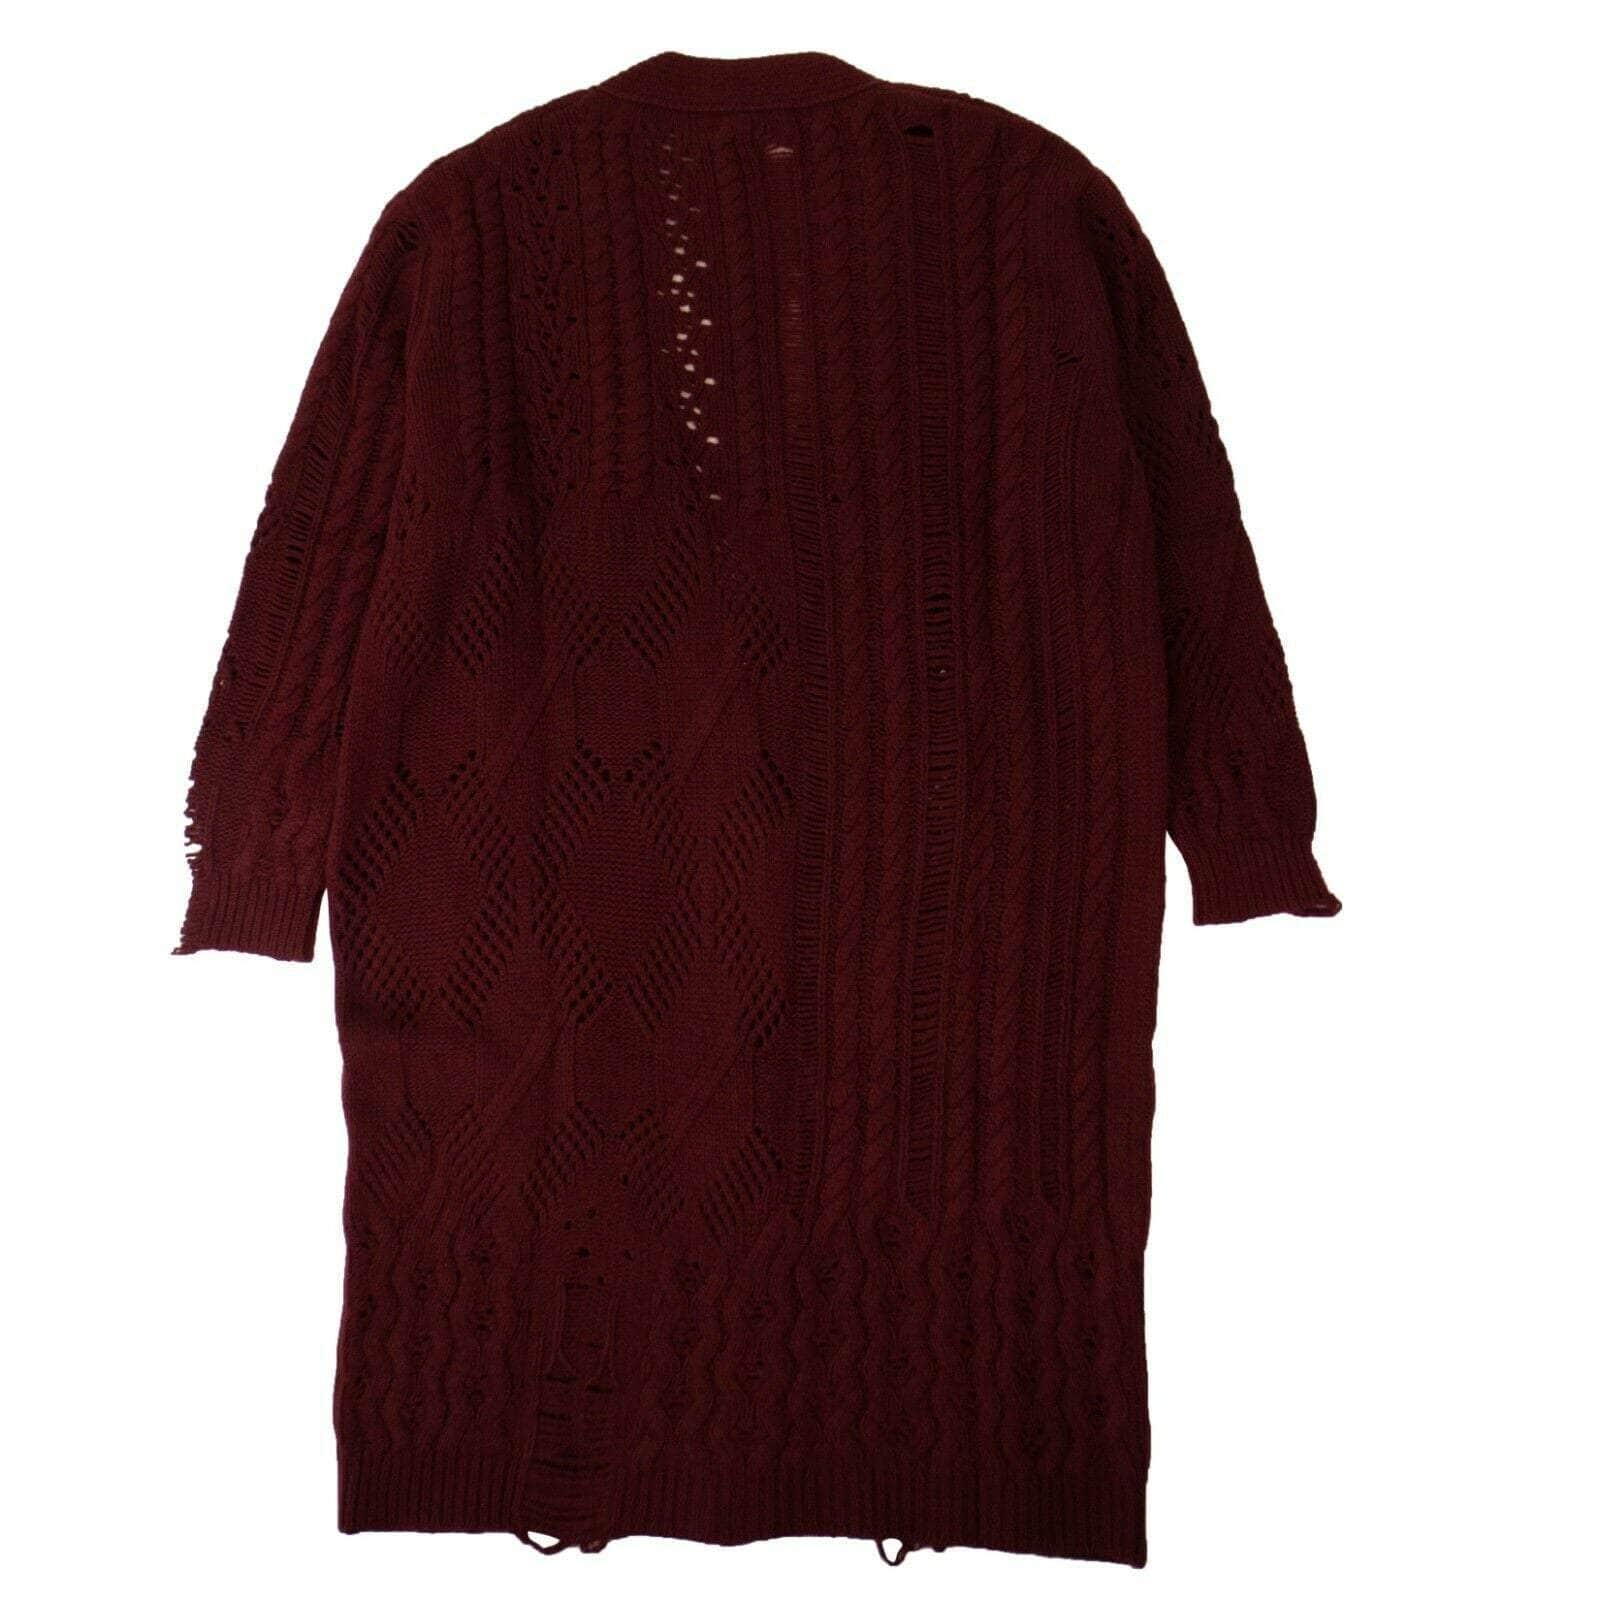 Amiri 1000-2000, amiri, channelenable-all, chicmi, couponcollection, gender-mens, main-clothing, size-l, size-m, size-s, size-xl Men's Burgundy Oversized Multipoint Cardigan Sweater